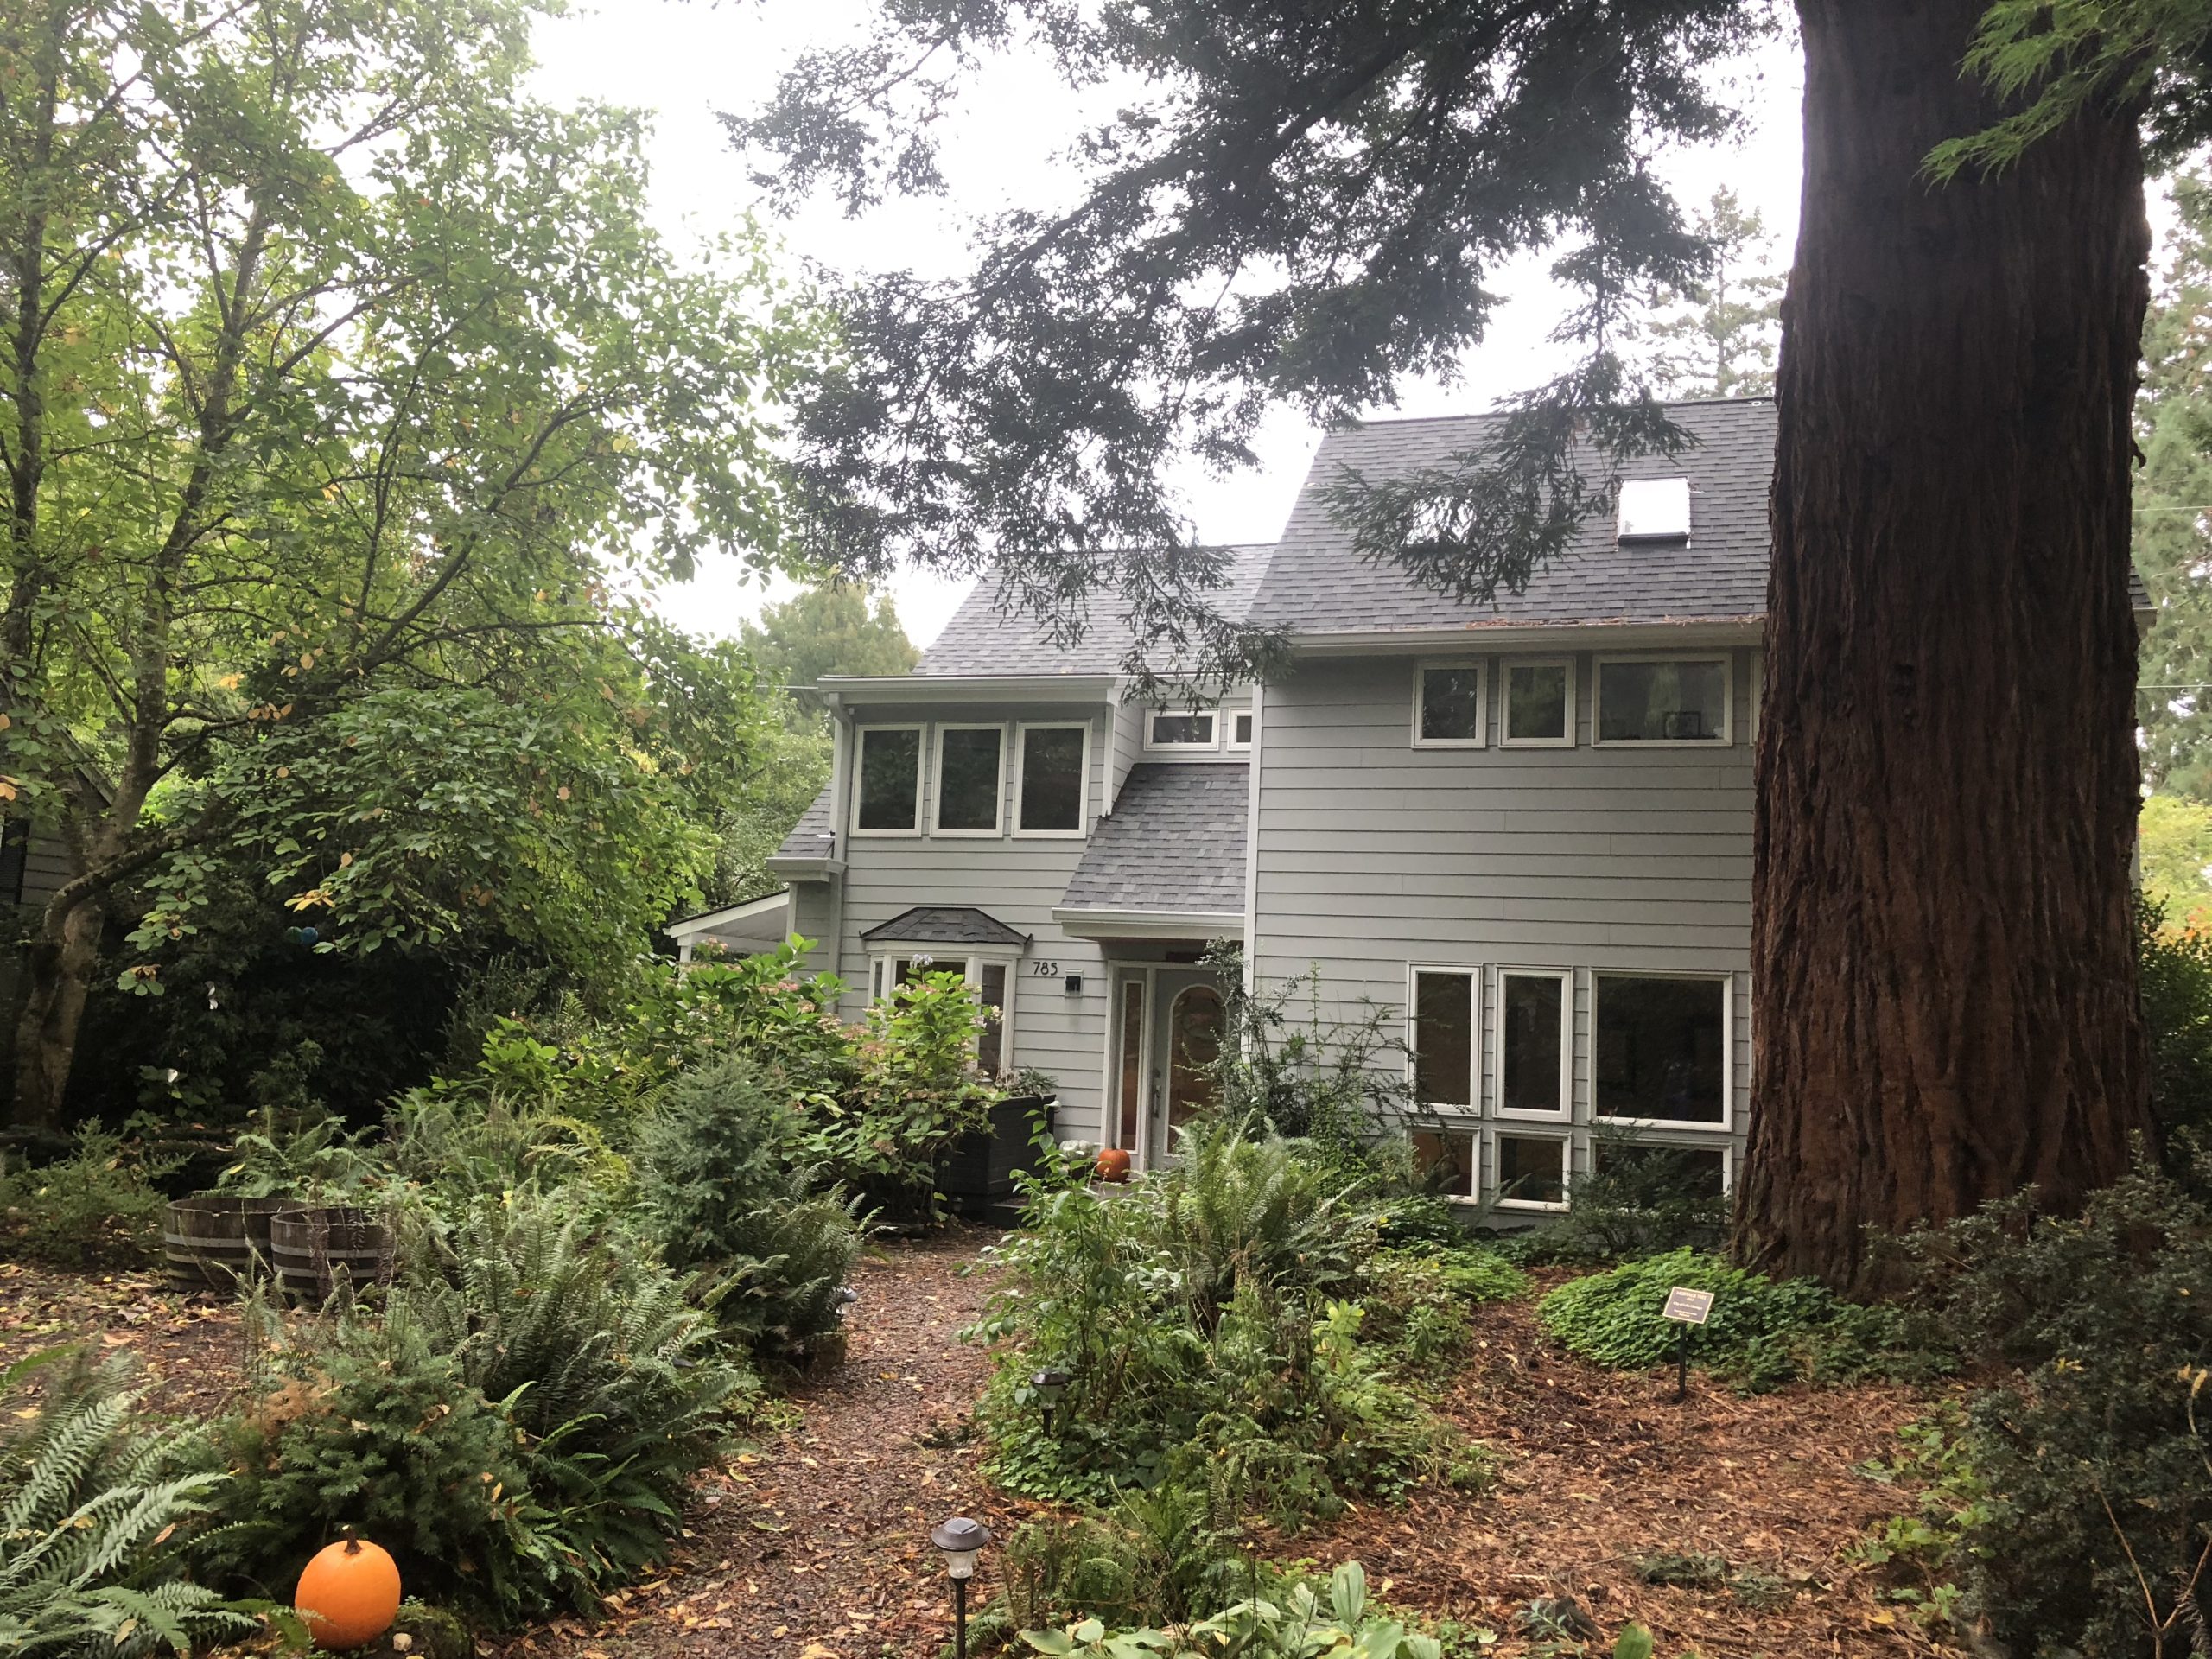 A Lake Oswego home in our "urban forest"